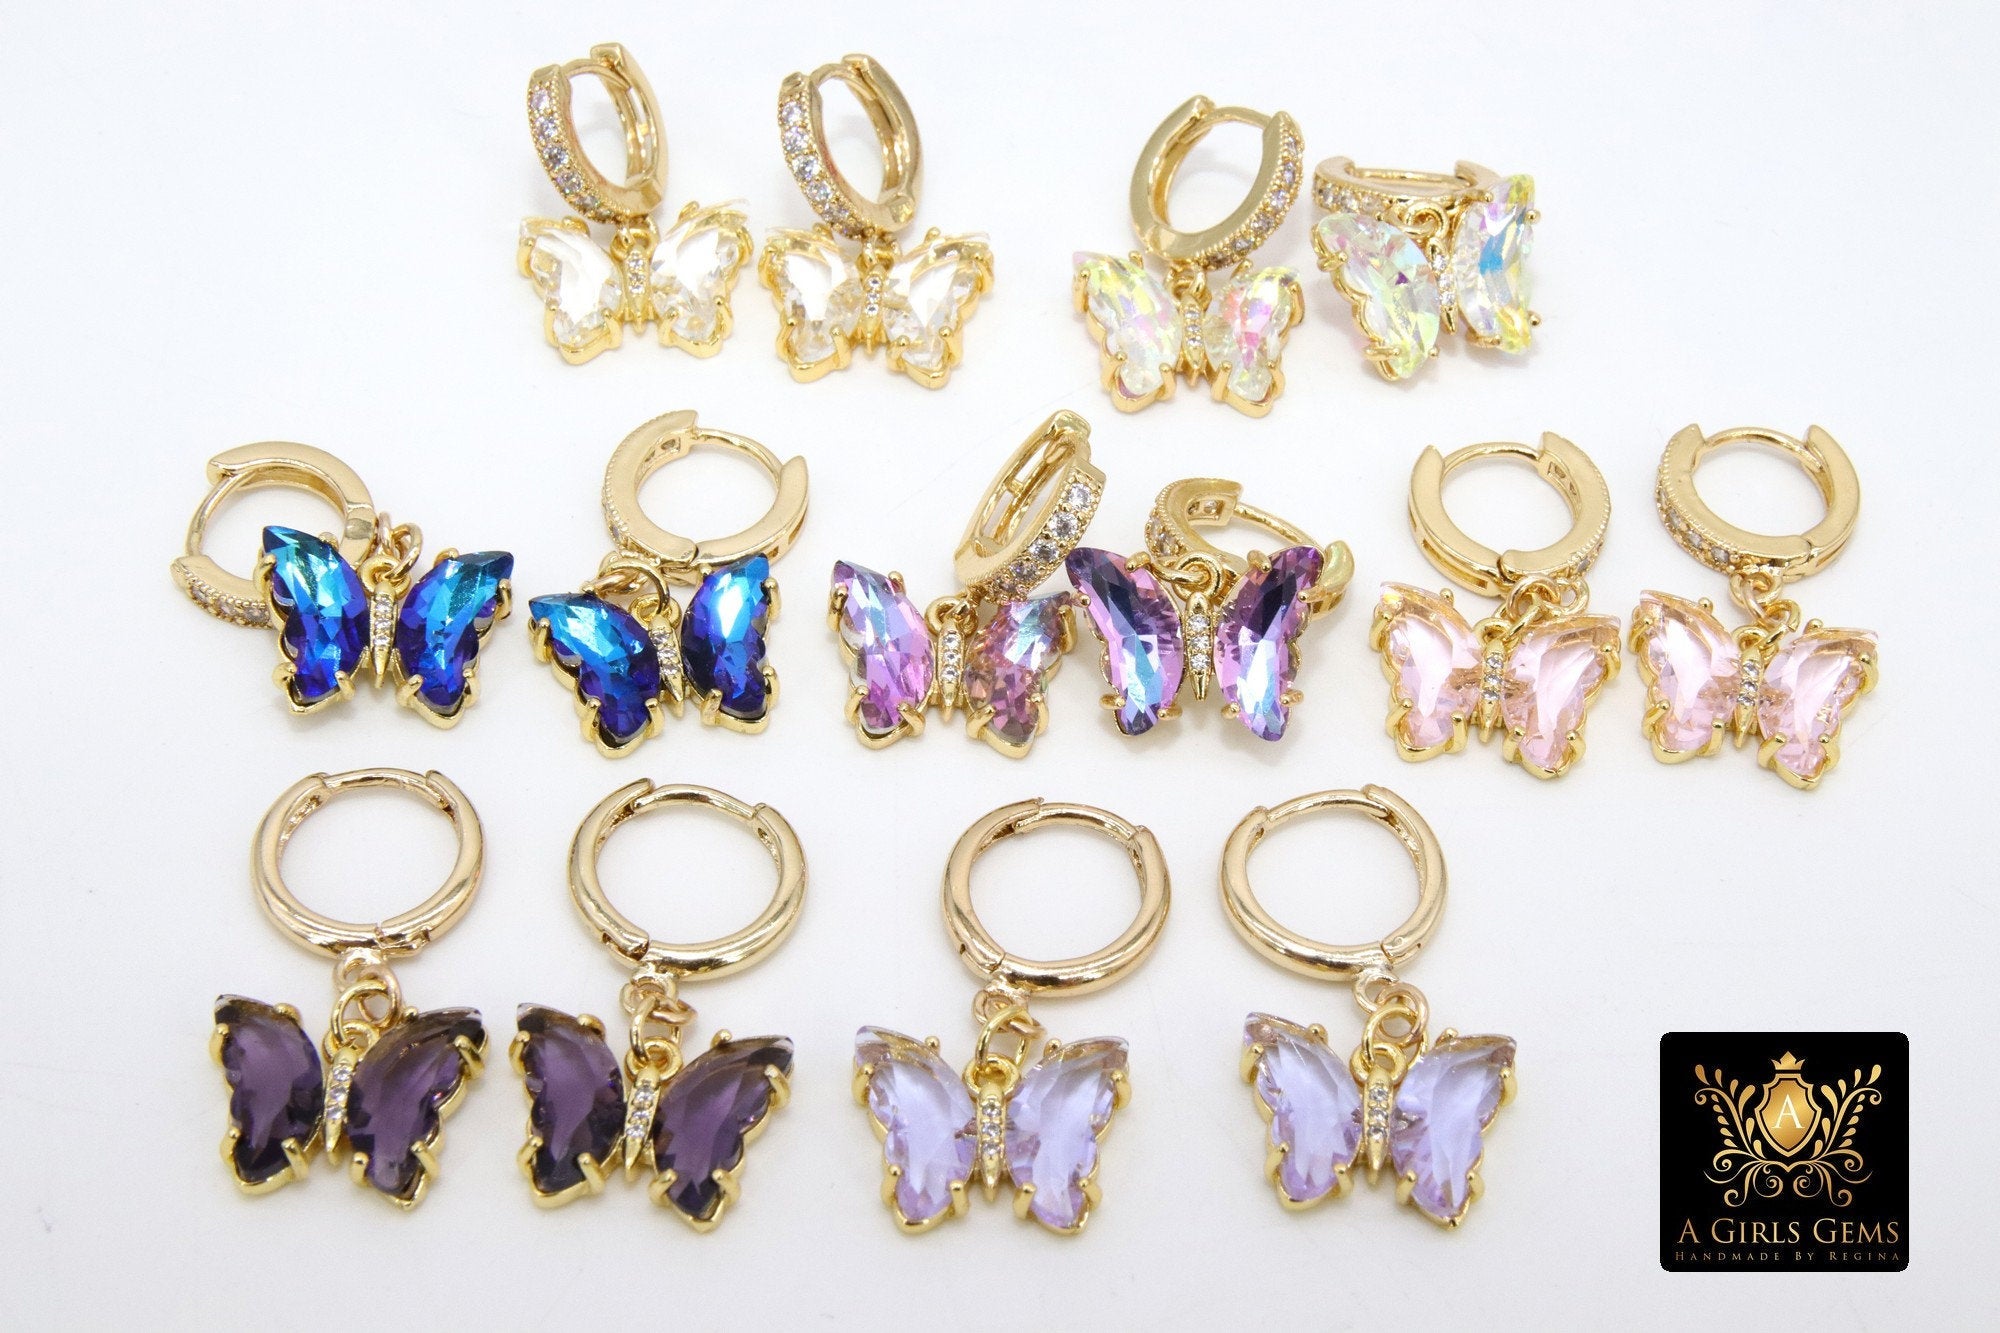 Butterfly Earrings, Gold Thick Huggie Hoop Ear Rings #654, High Quality Crystal Butterfly Huggies, 12 Color Choices - A Girls Gems